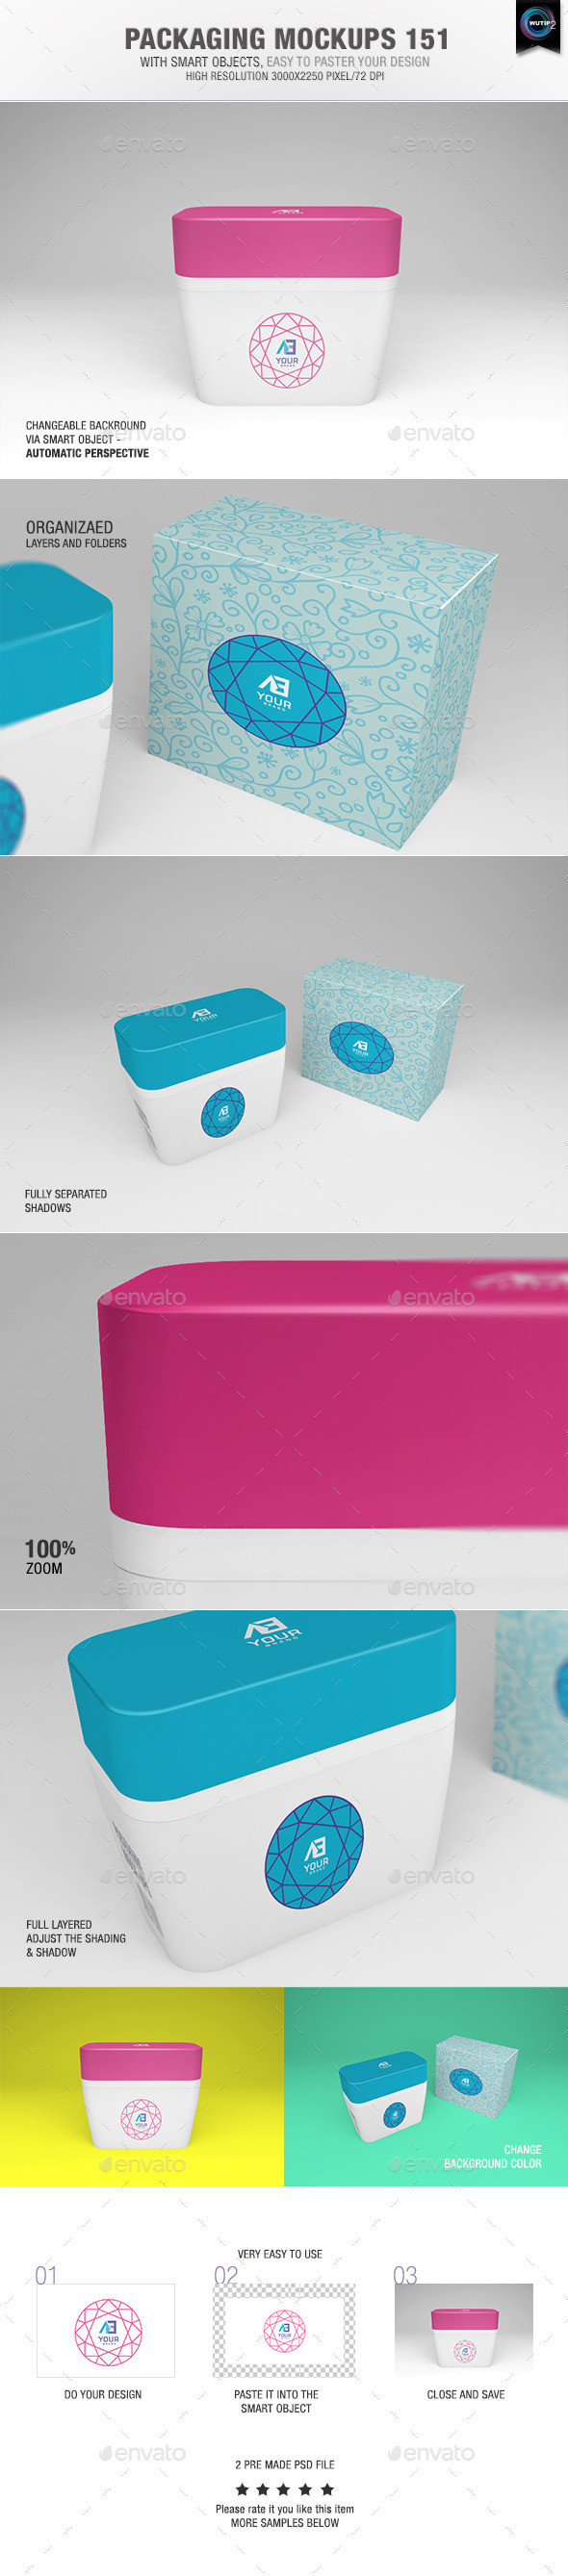 Packaging 20mockups 20151 20preview